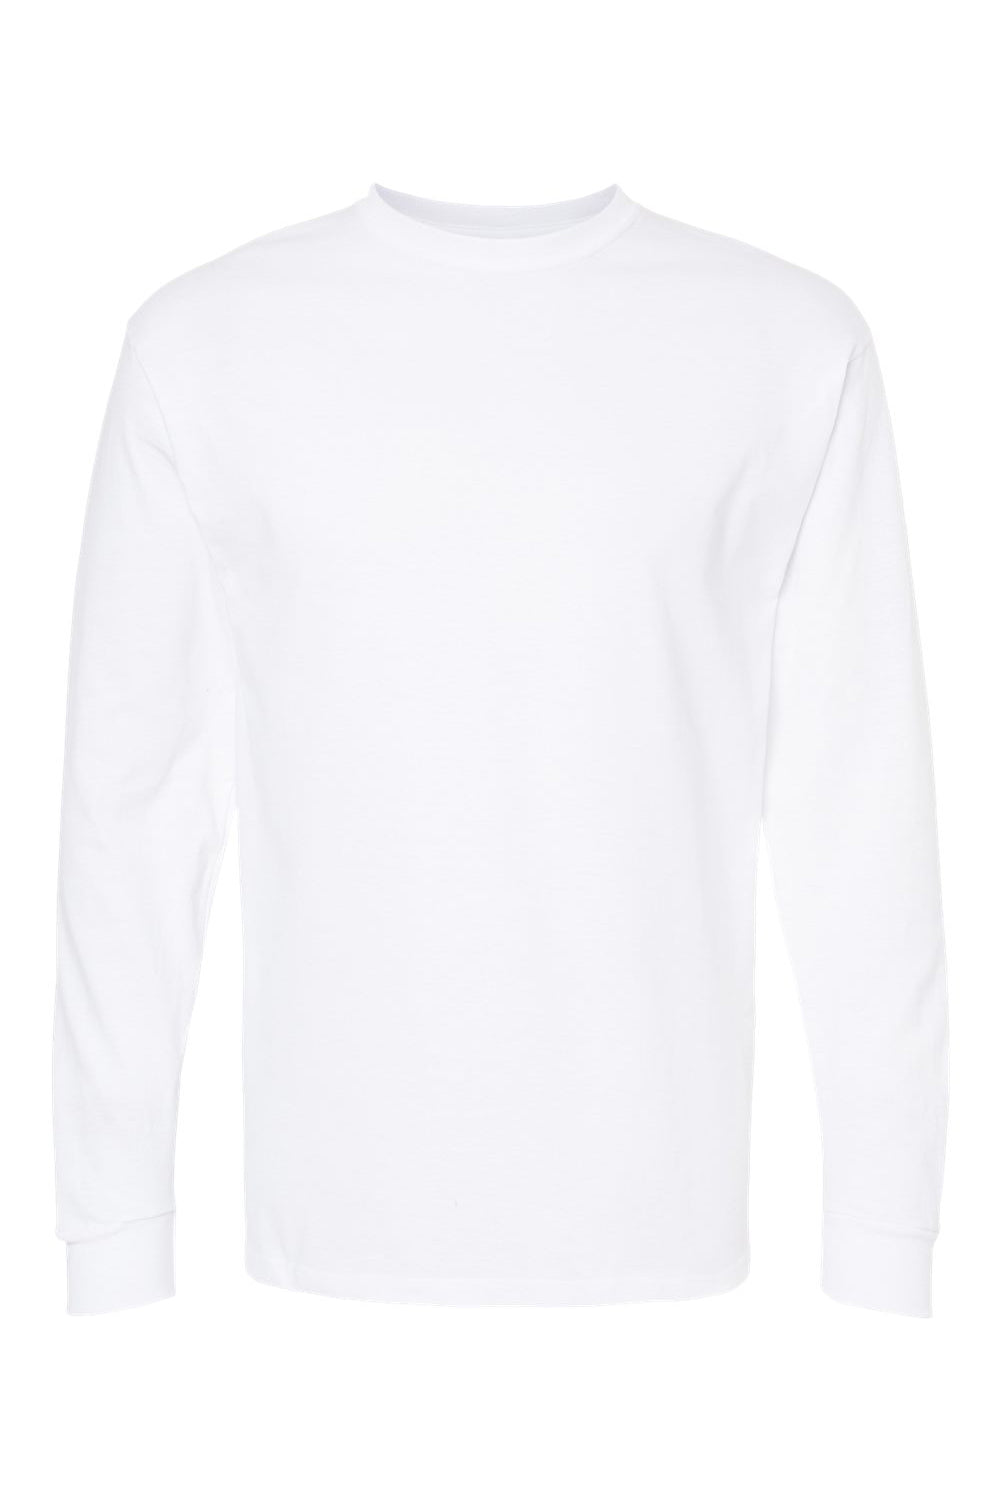 M&O 4820 Mens Gold Soft Touch Long Sleeve Crewneck T-Shirt White Flat Front